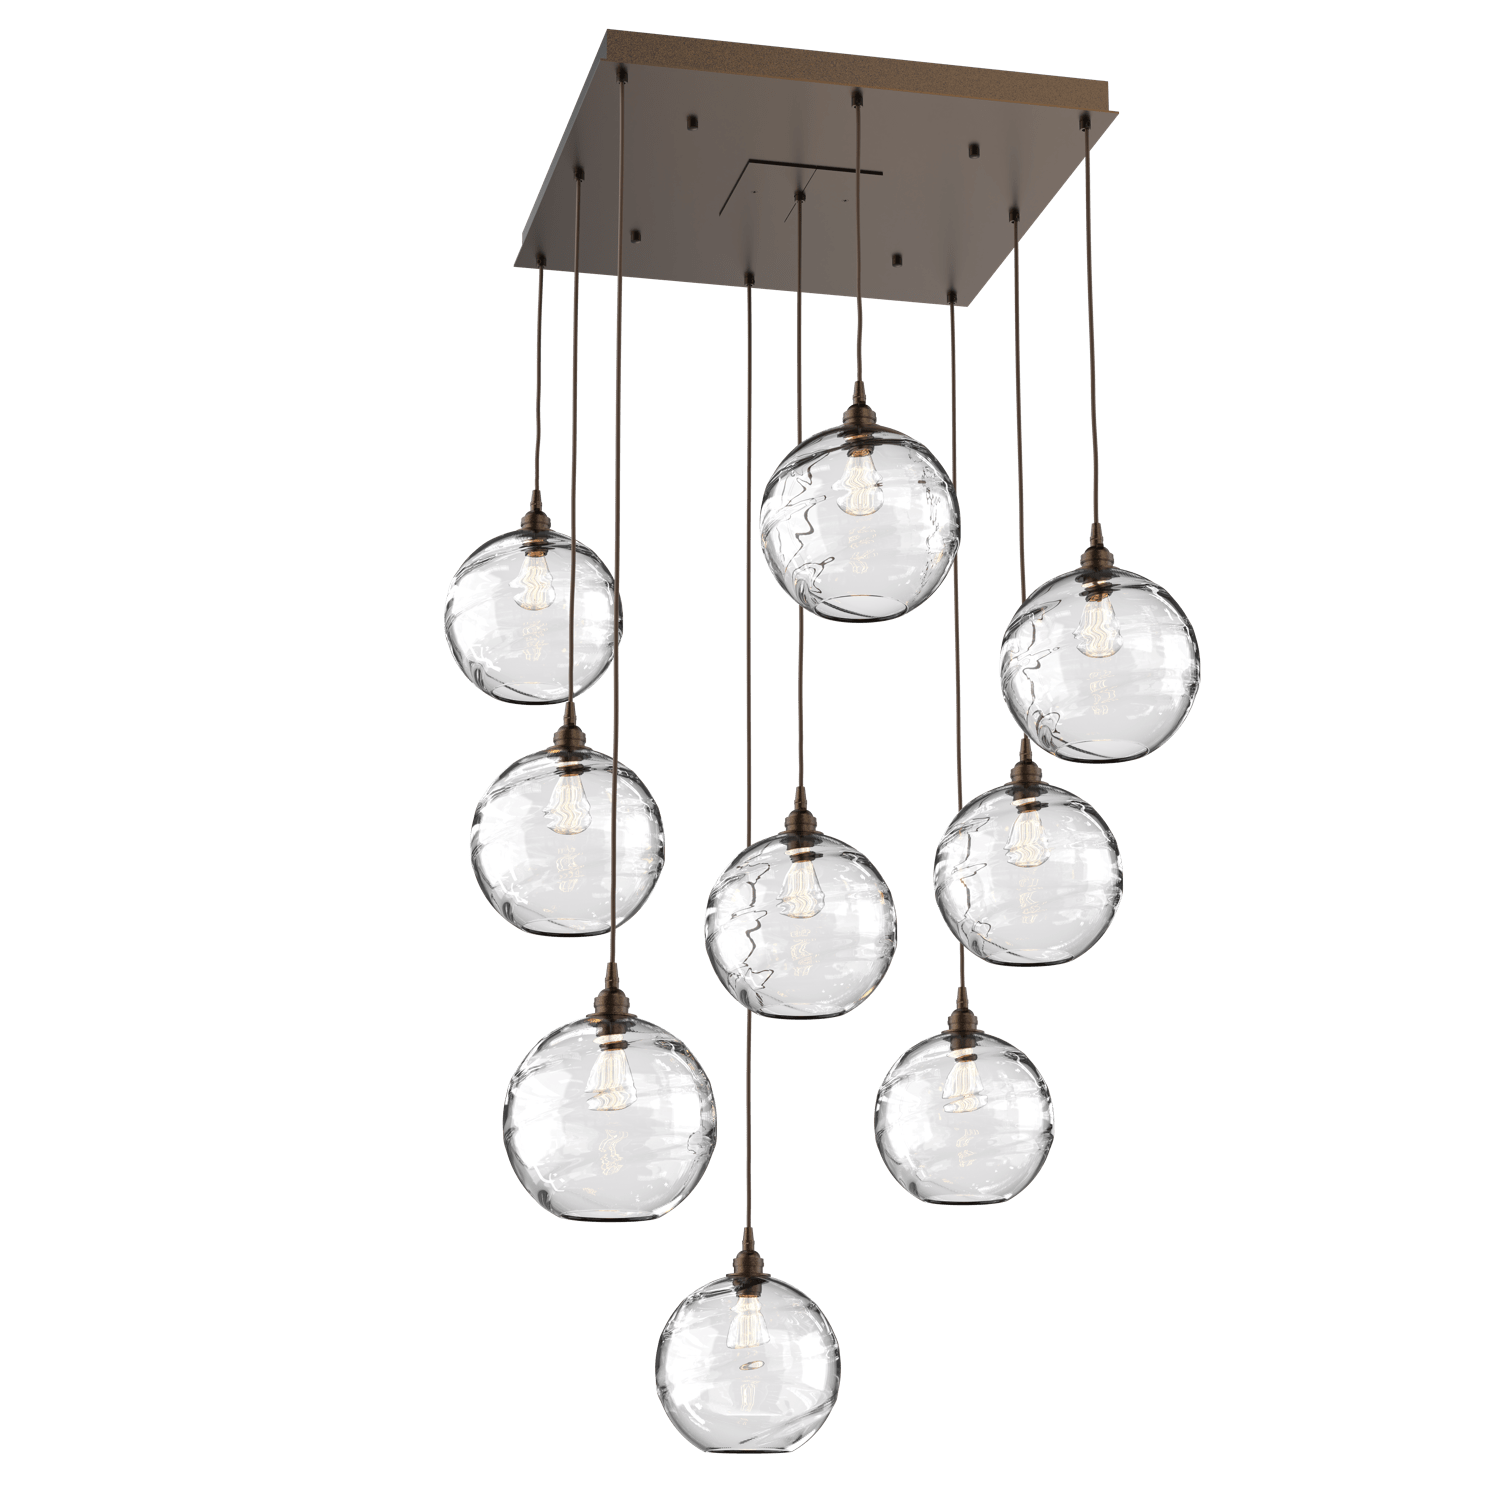 CHB0047-09-FB-OC-Hammerton-Studio-Optic-Blown-Glass-Terra-9-light-square-pendant-chandelier-with-flat-bronze-finish-and-optic-clear-blown-glass-shades-and-incandescent-lamping